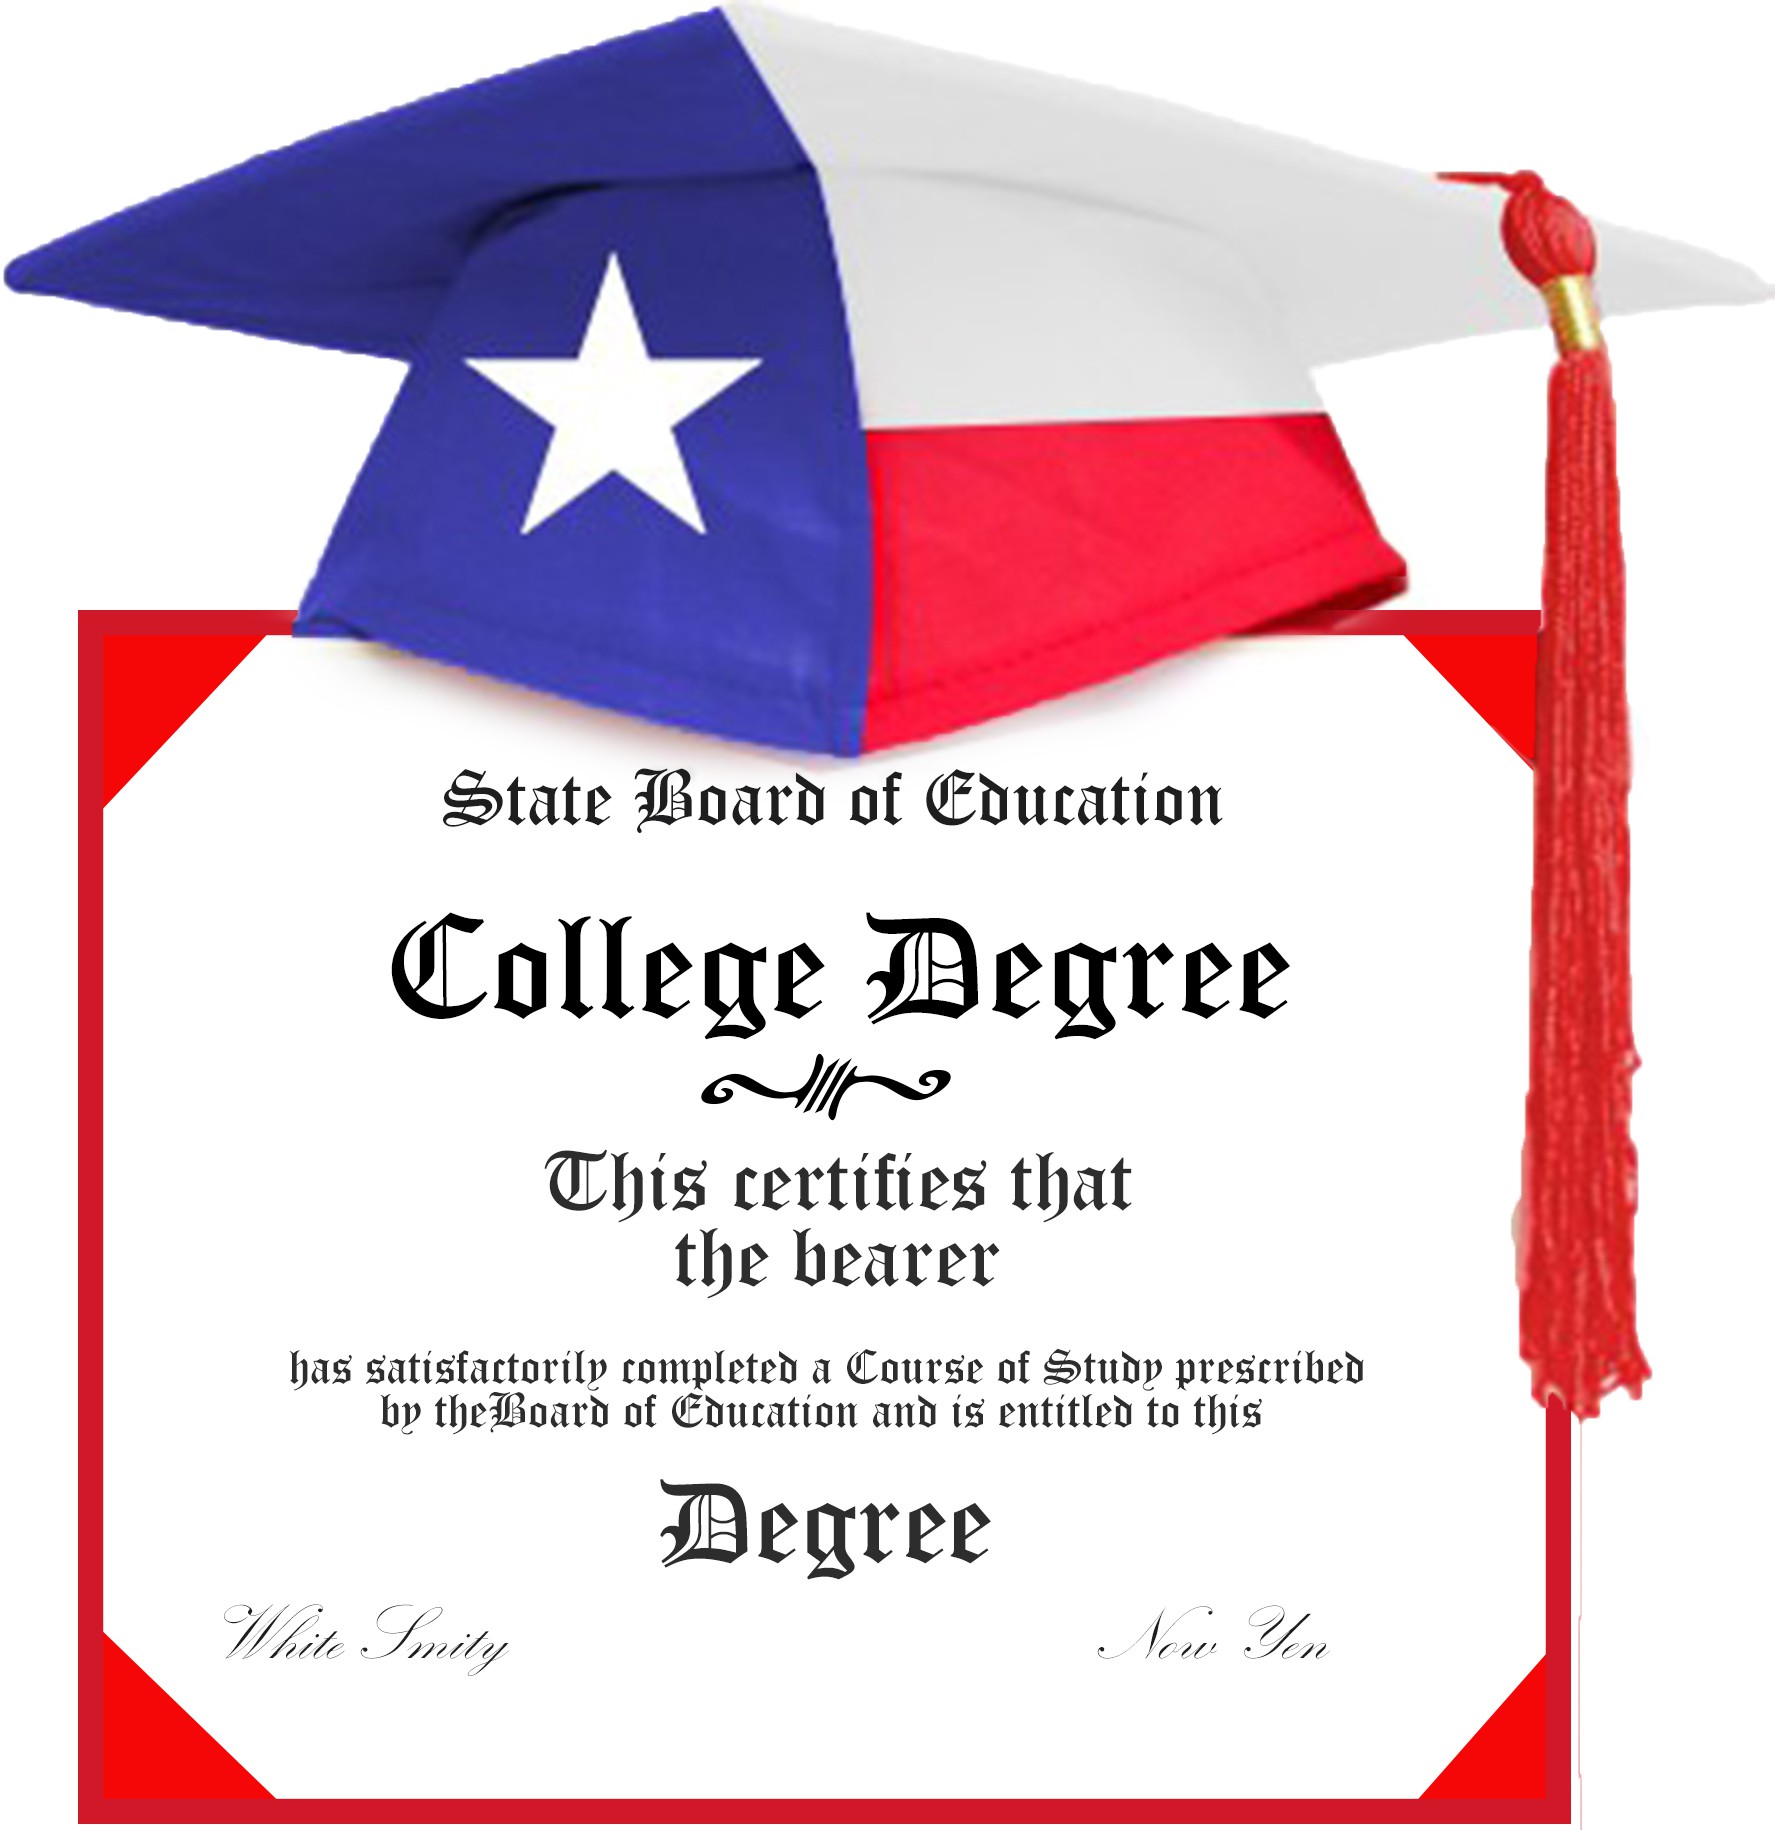 The University of Texas Health Science Center at Houston College Degree